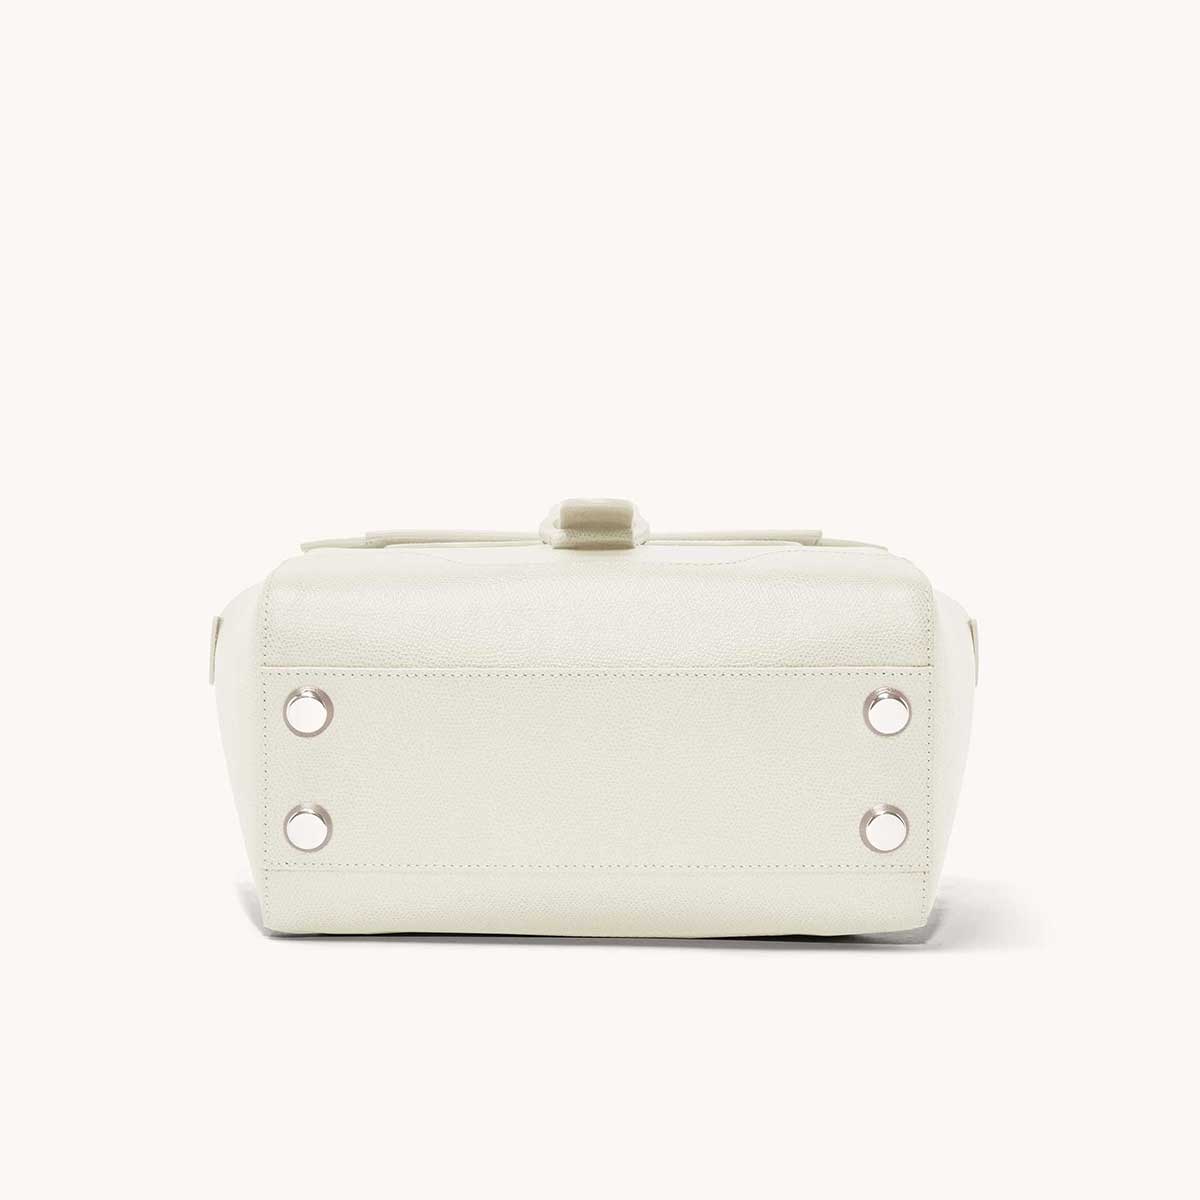 Midi Maestra Bag Pebbled Cream with Silver Hardware Base View with "Feet"